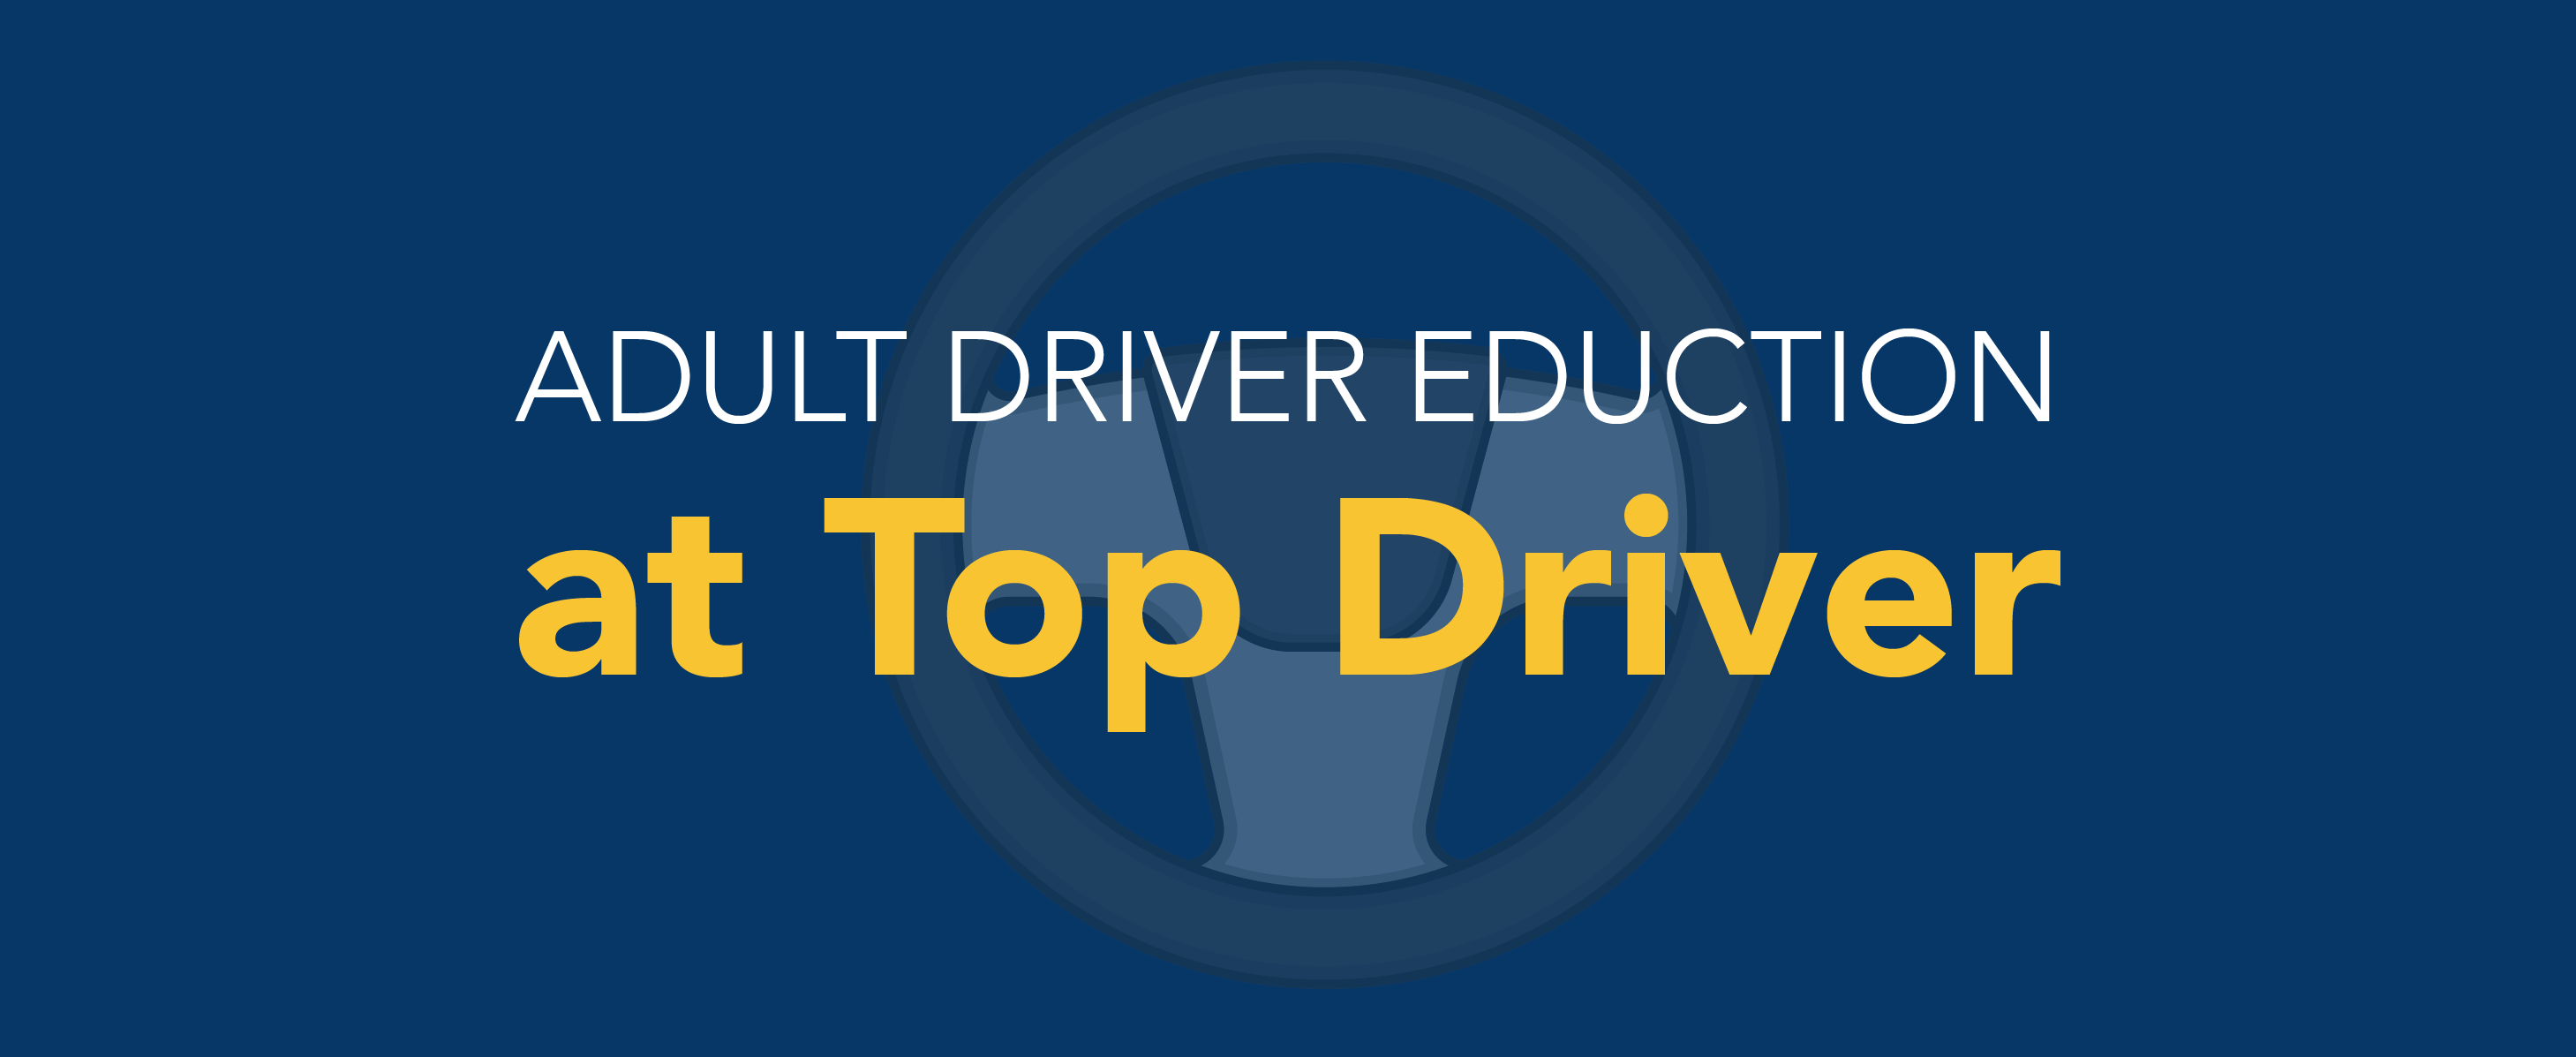 Adult Driver Education at Top Driver